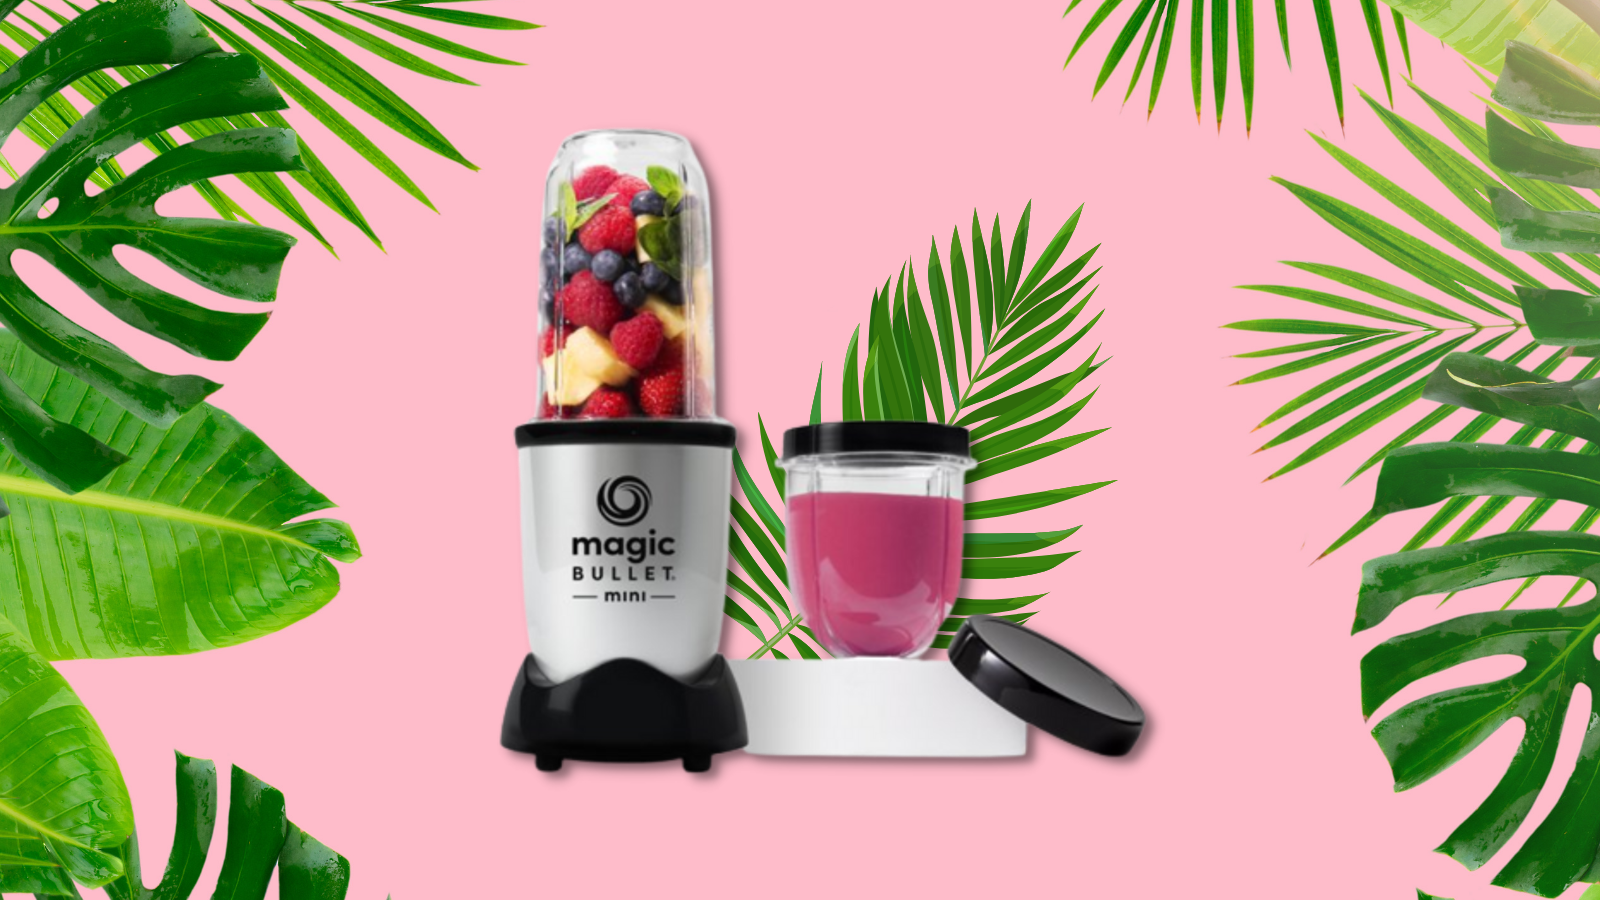 magic bullet mini personal blender with tropical background